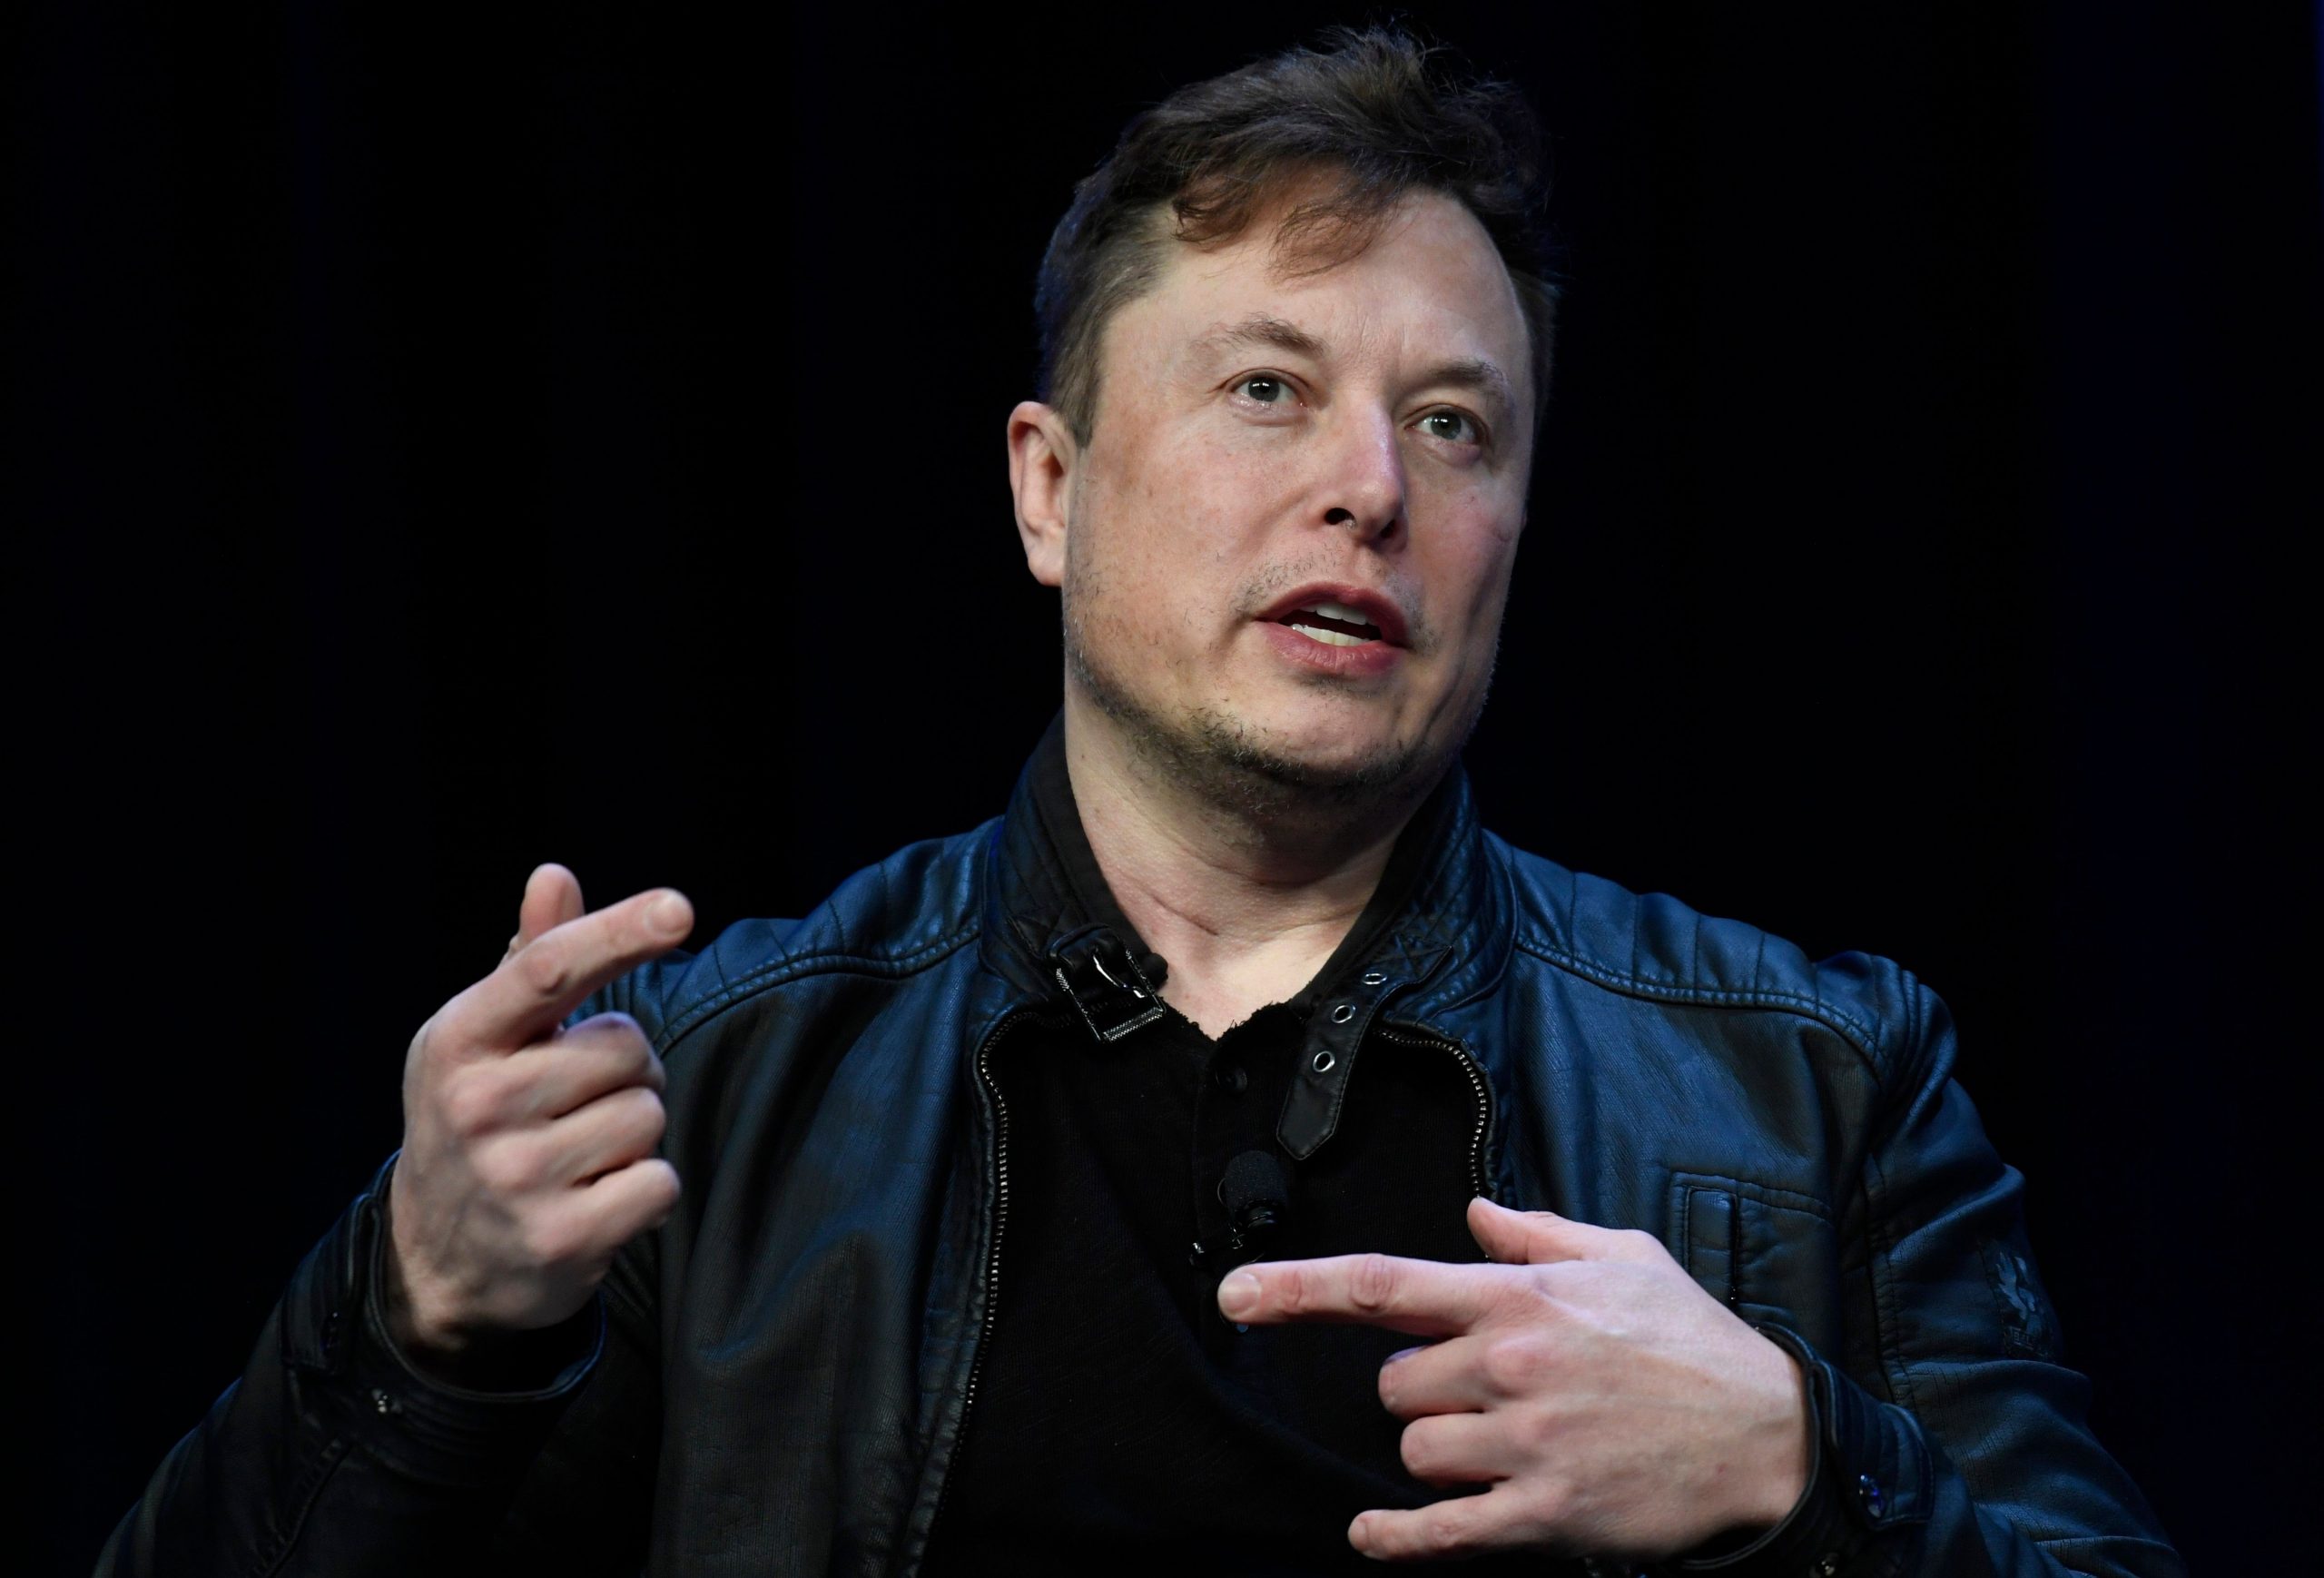 Elon Musk aims to rein in Twitter pay, make money from tweets: Report